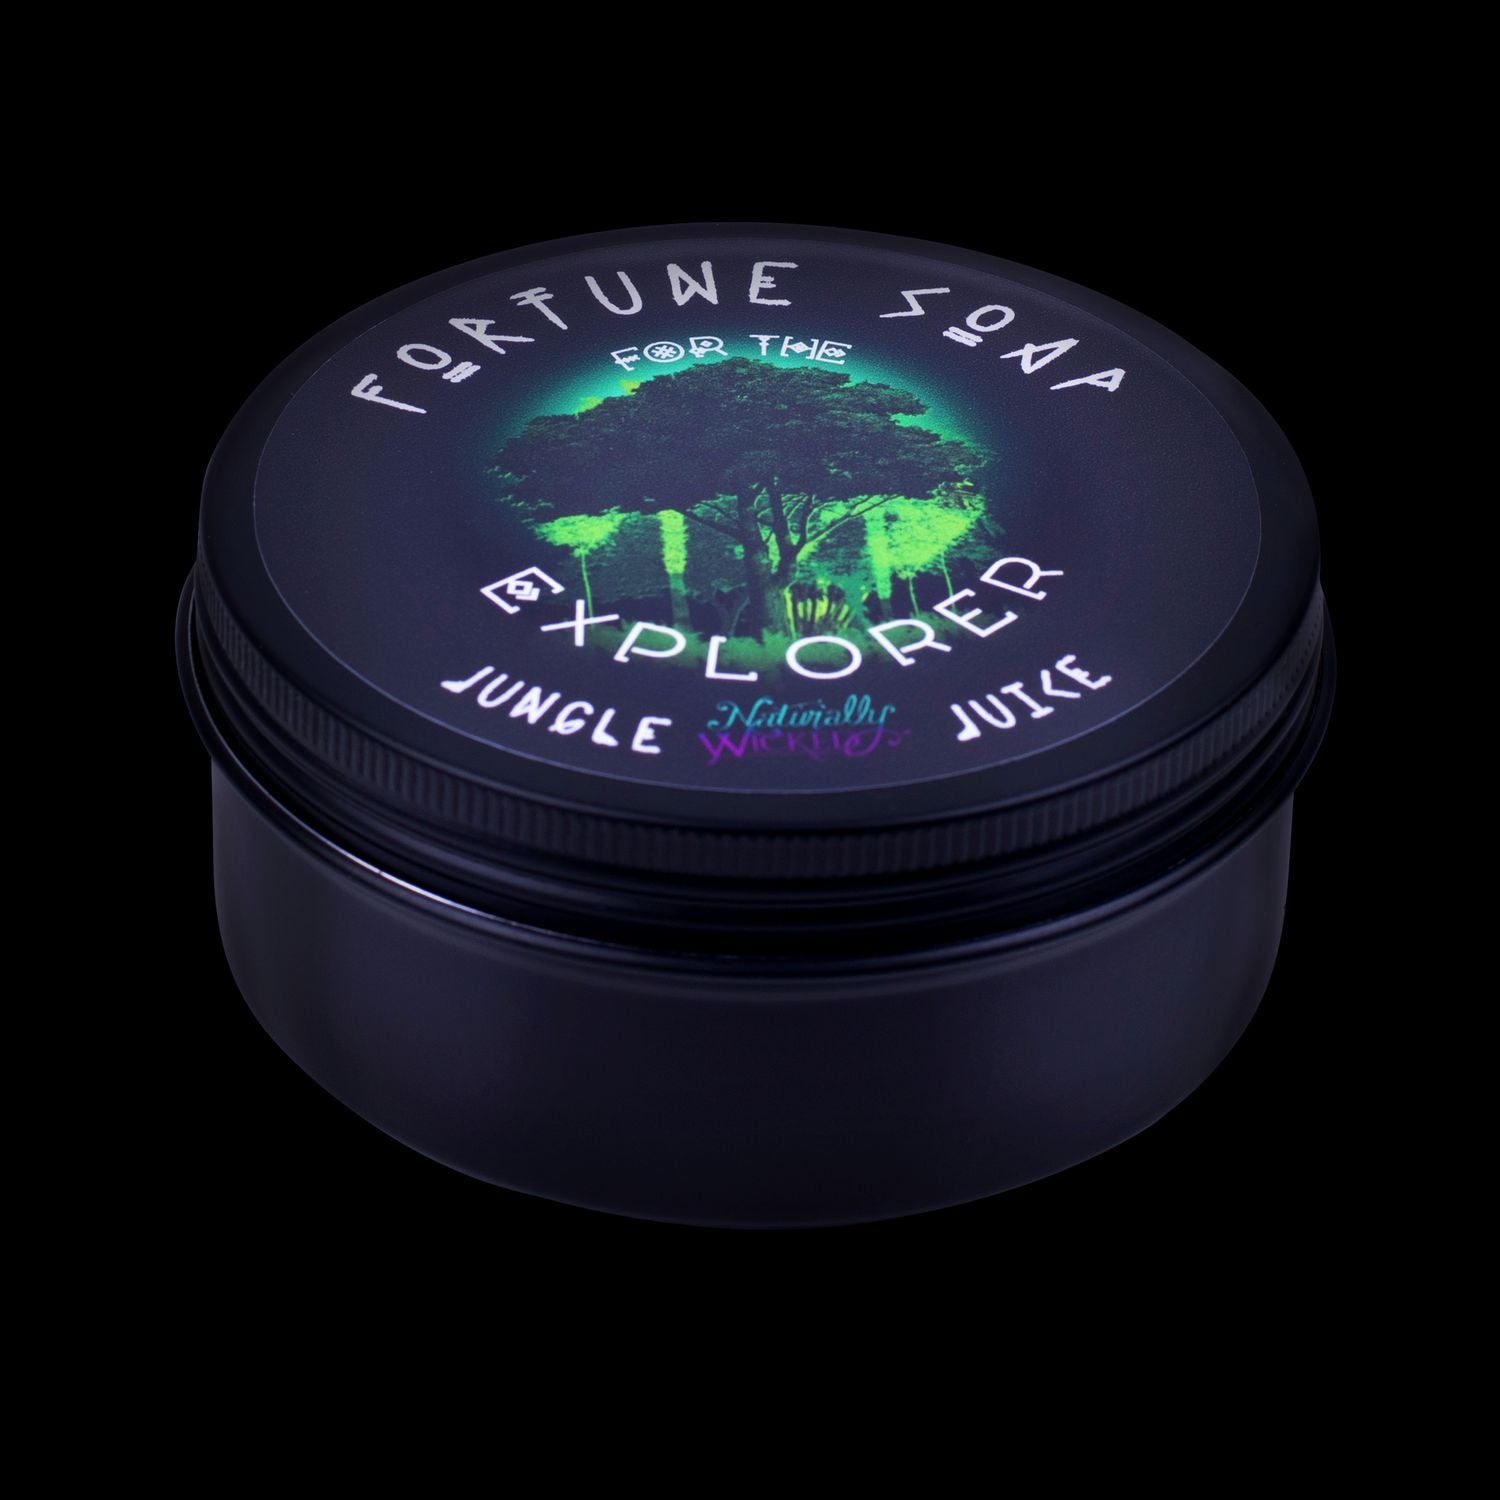 The Perfect Gift For An Explorer . Naturally Wicked Fortune Soap For The Explorer. Black Gloss Gift Tin Included